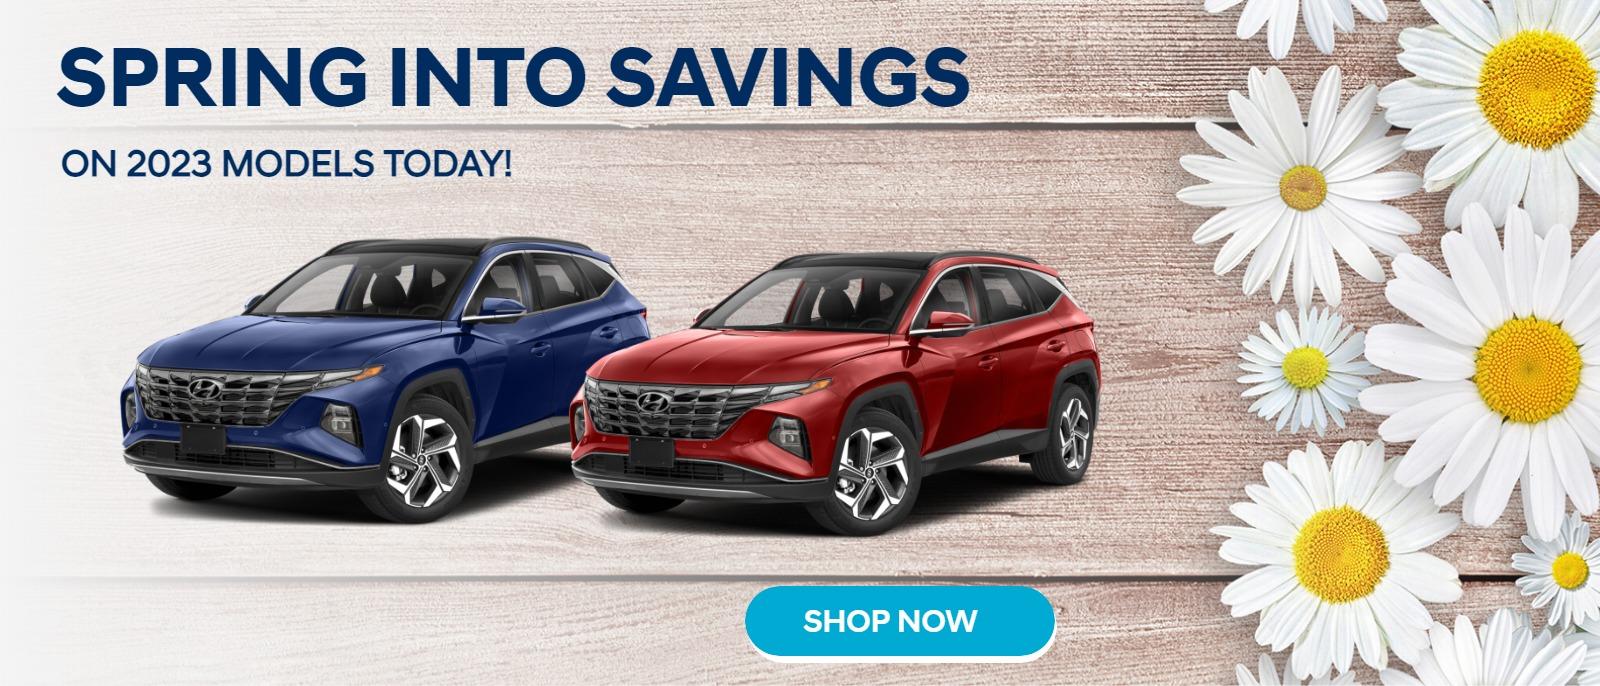 FALL INTO SAVINGS On 2023 Tucsons Today!